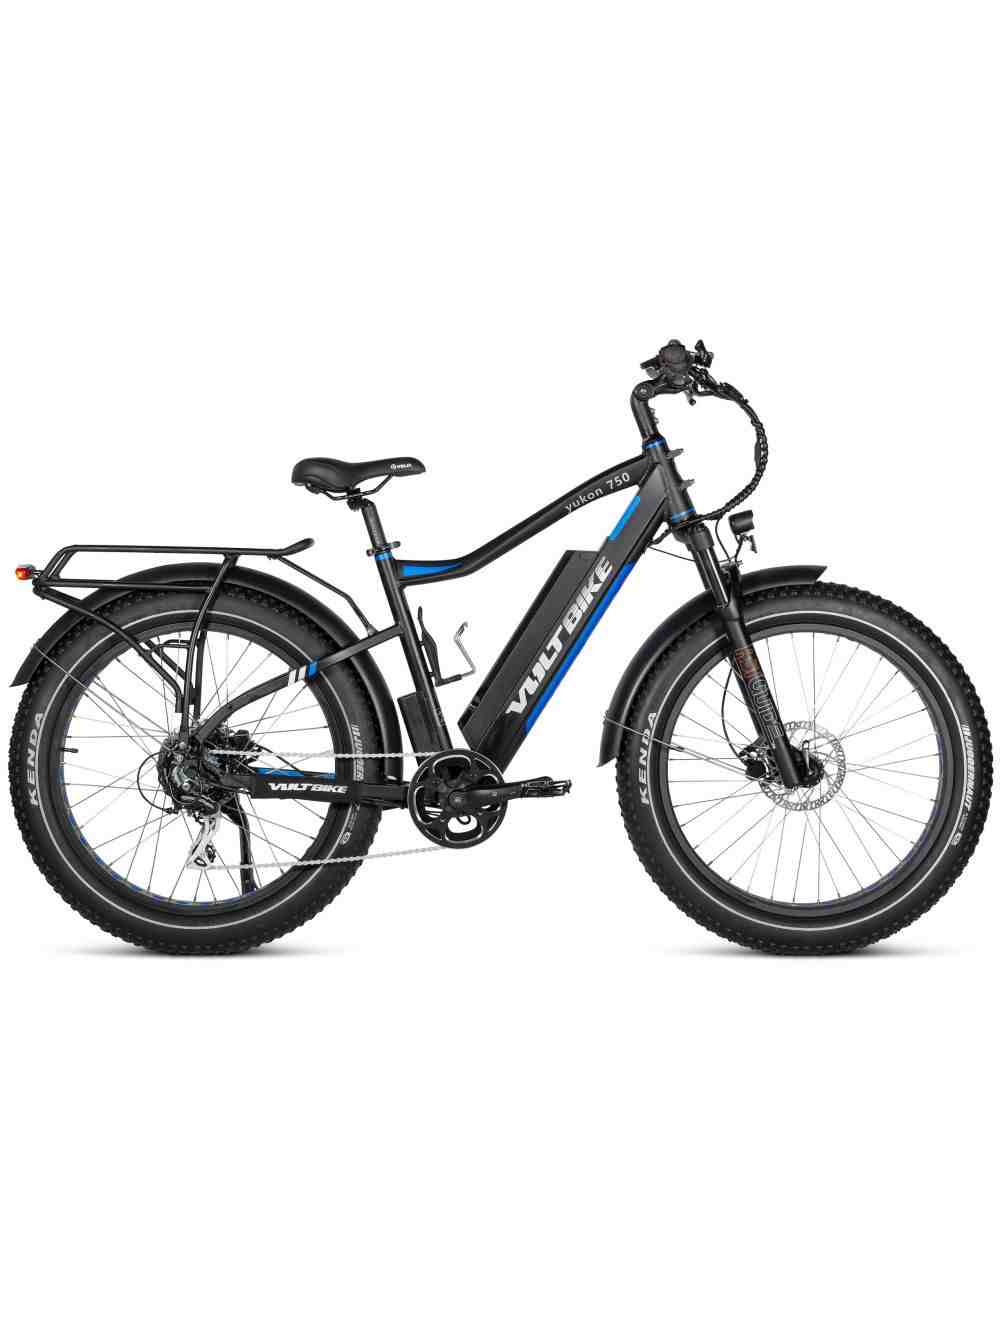 What is the best voltage for an electric bike?